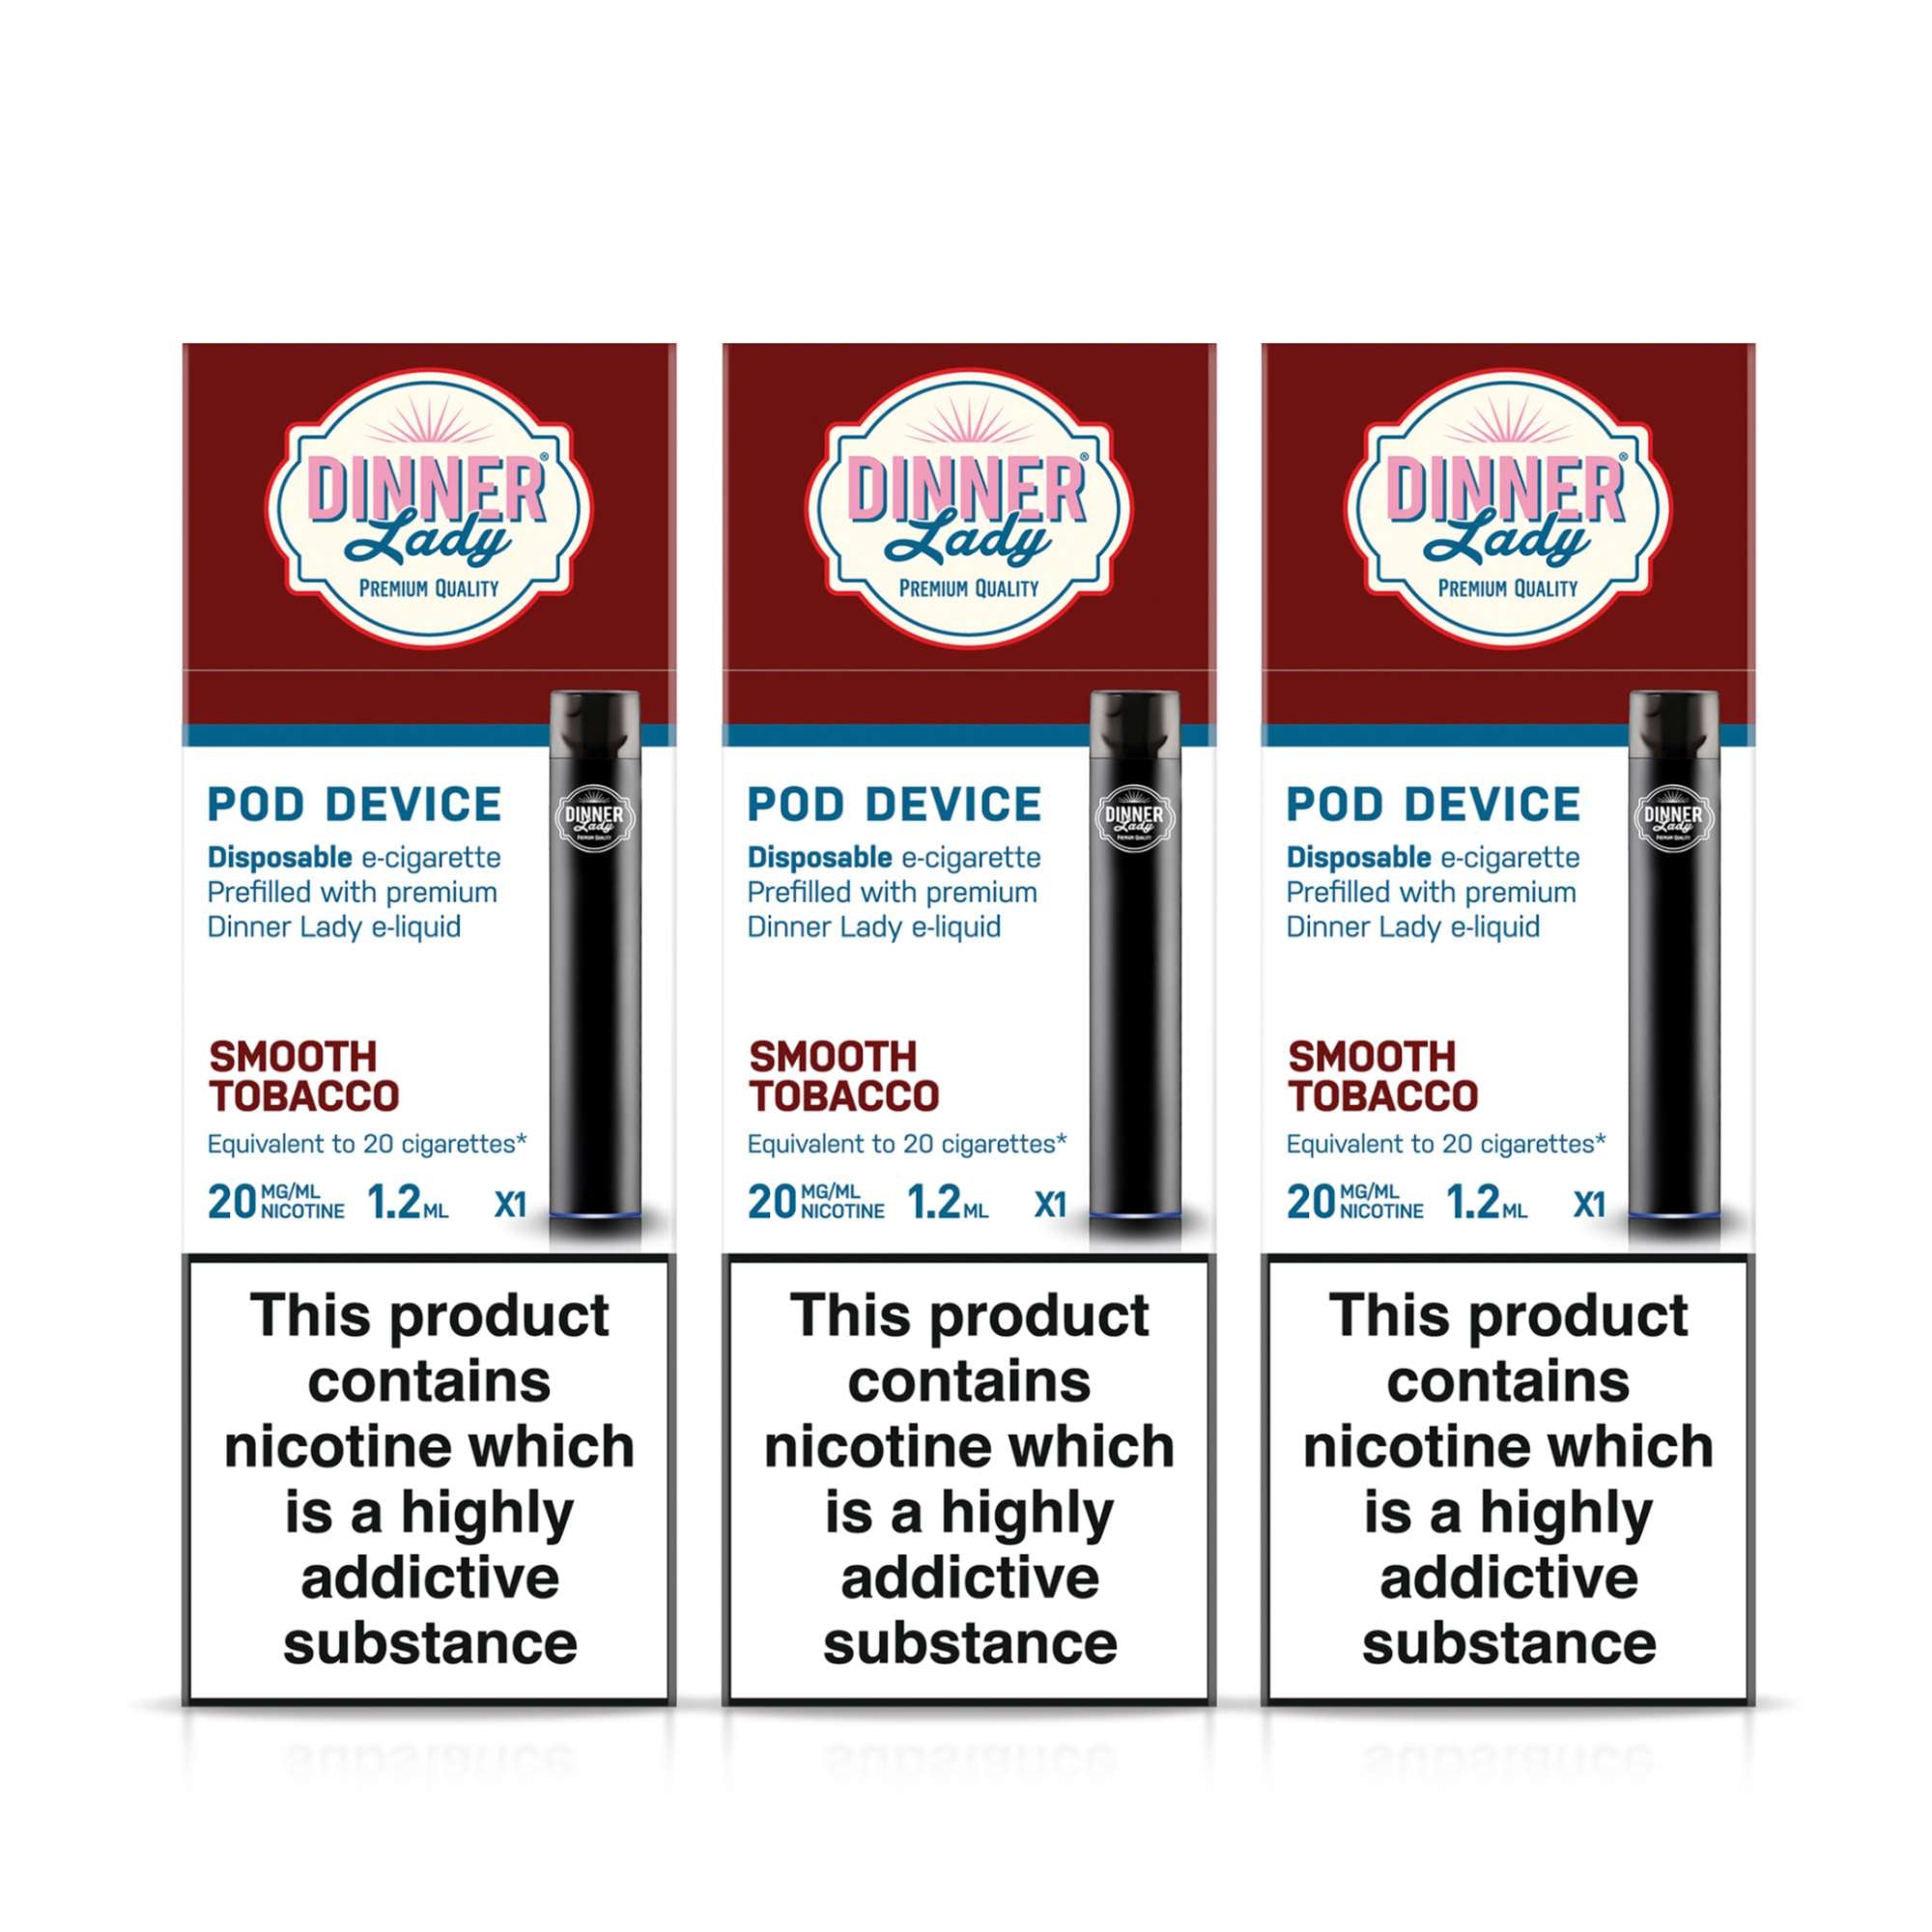 Three Pack - Dinner Lady Smooth Tobacco Disposable E-Cigarette